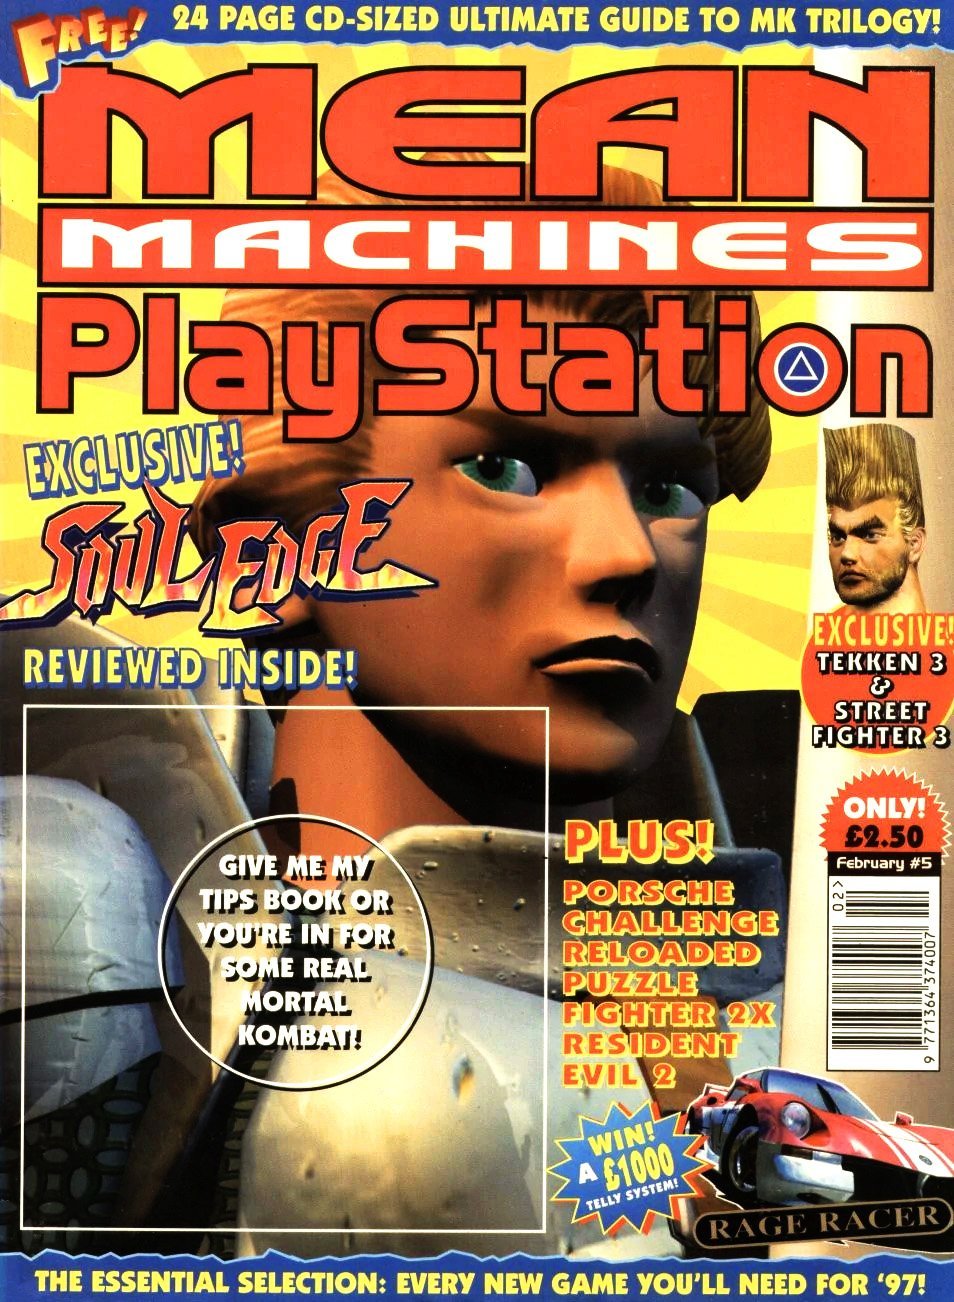 Mean Machines Playstation 05 (February 1997)